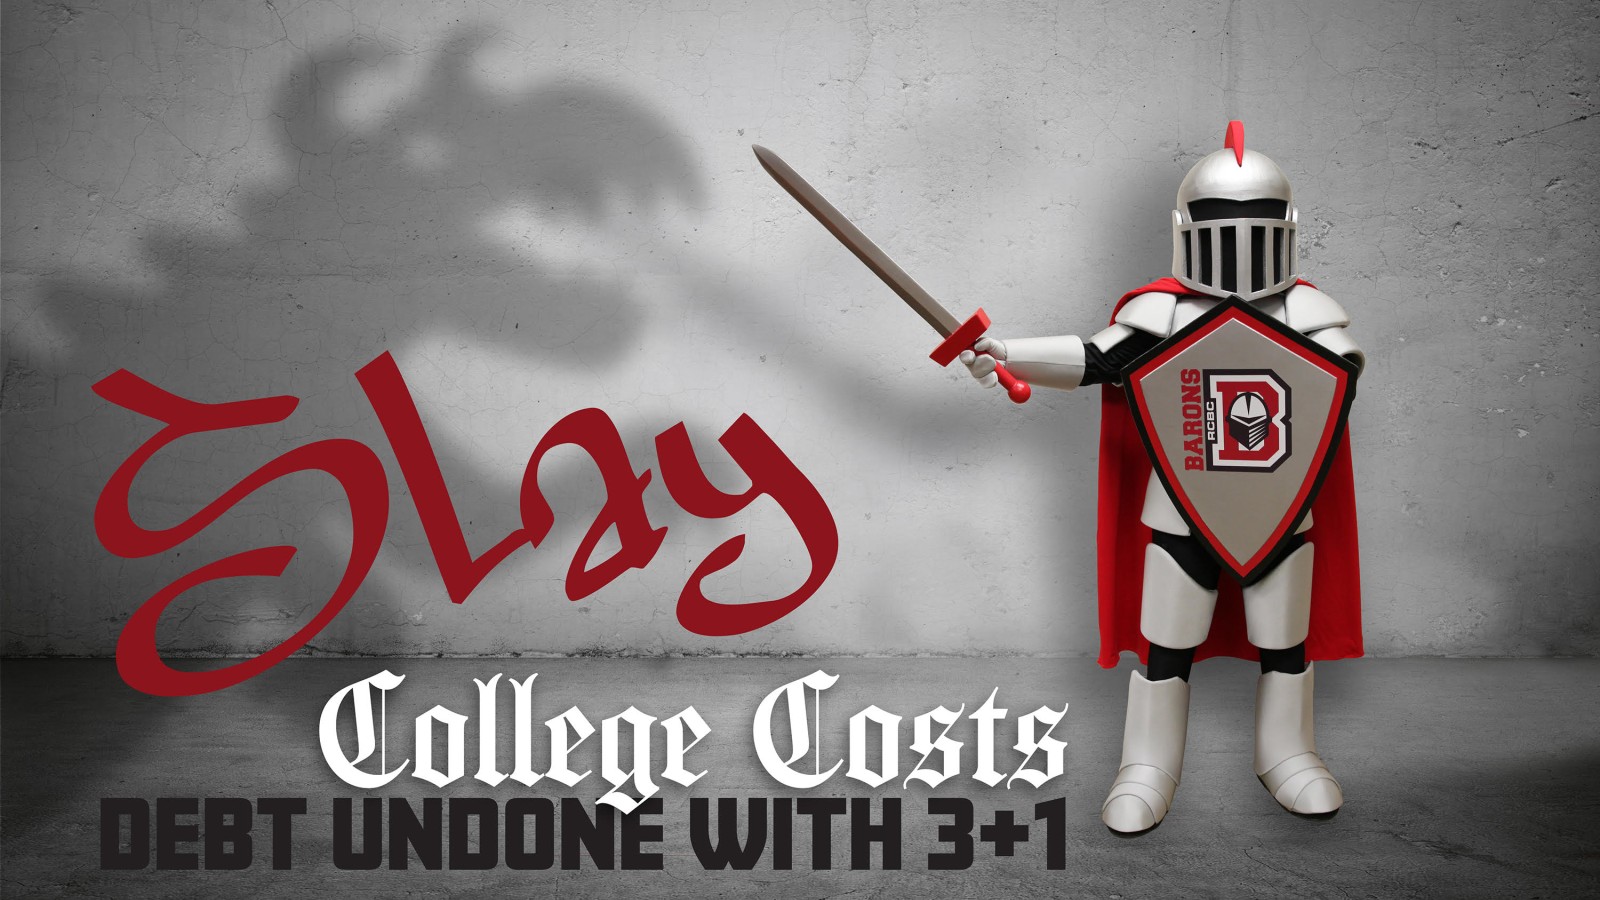 Slay college costs. Debt Undone with 3+1